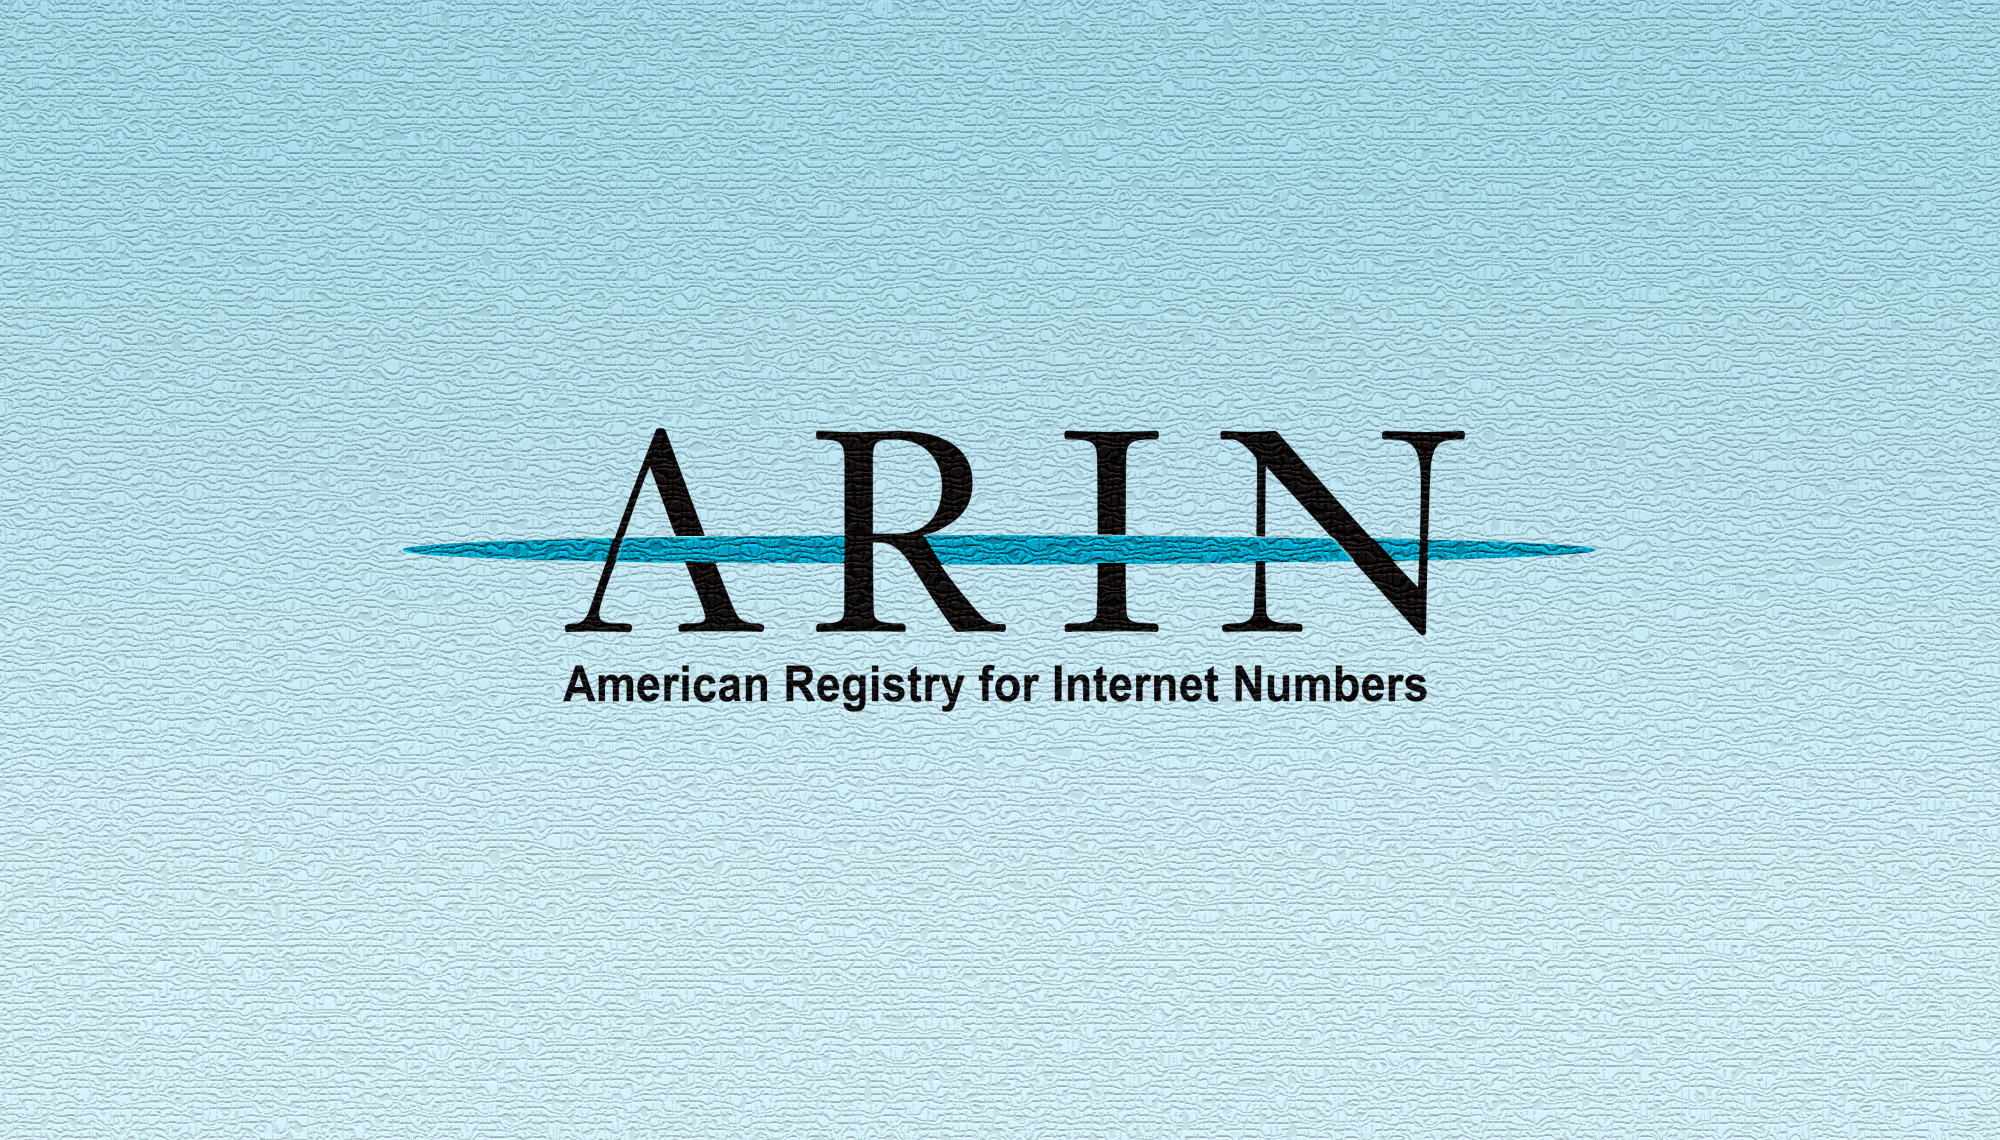 The 12 Days of IPv6: Day 12, How to Get IPv6 Addresses From ARIN